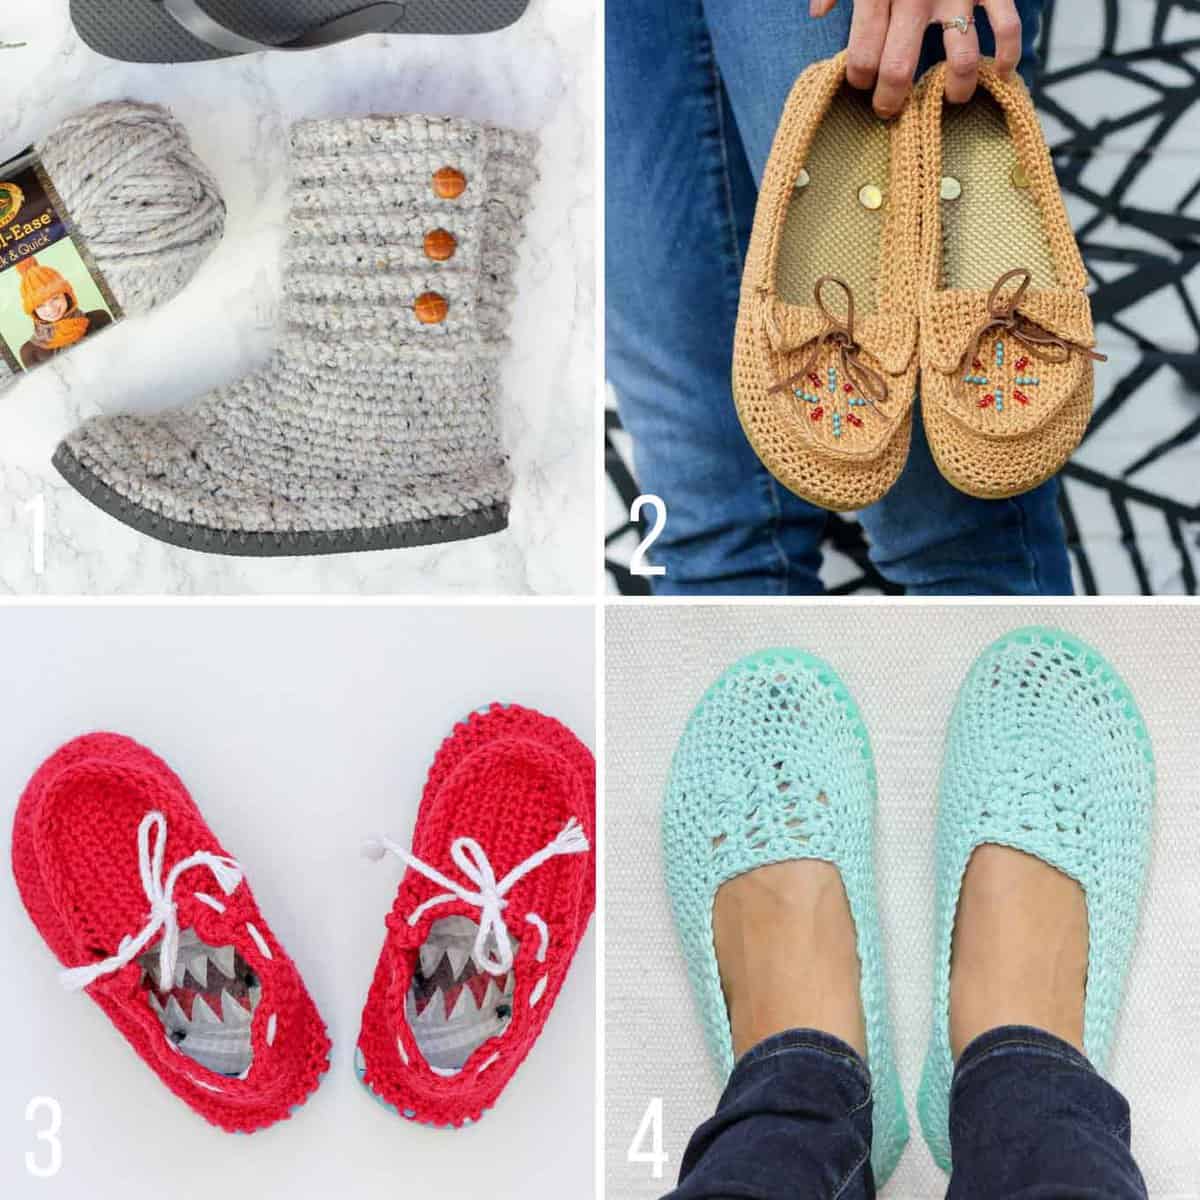 Free crochet patterns using flip flops to make slippers, boots, moccasins and kids boat shoes. | Make And Do Crew